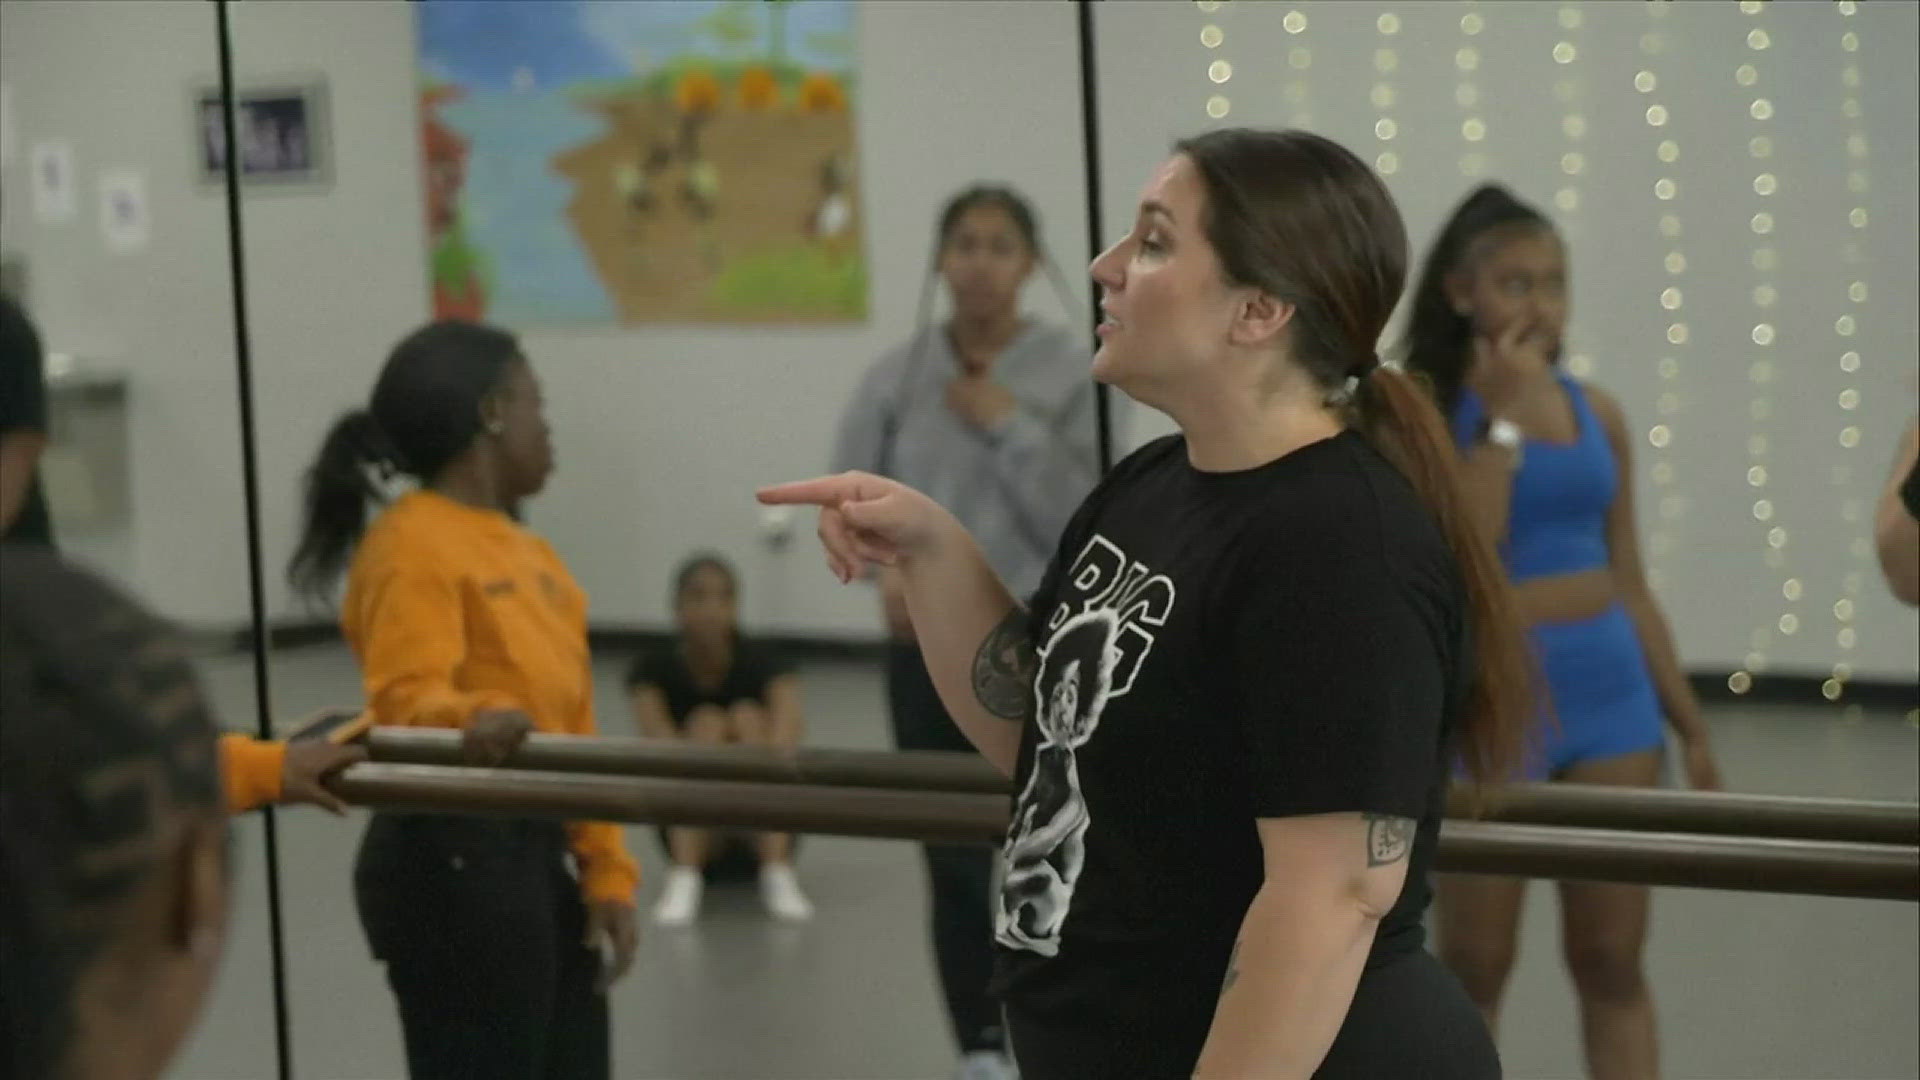 Kara Noble with the North Community High School inspires her students to step onto the dance floor. Her hard work has given students a safe space to be themselves.